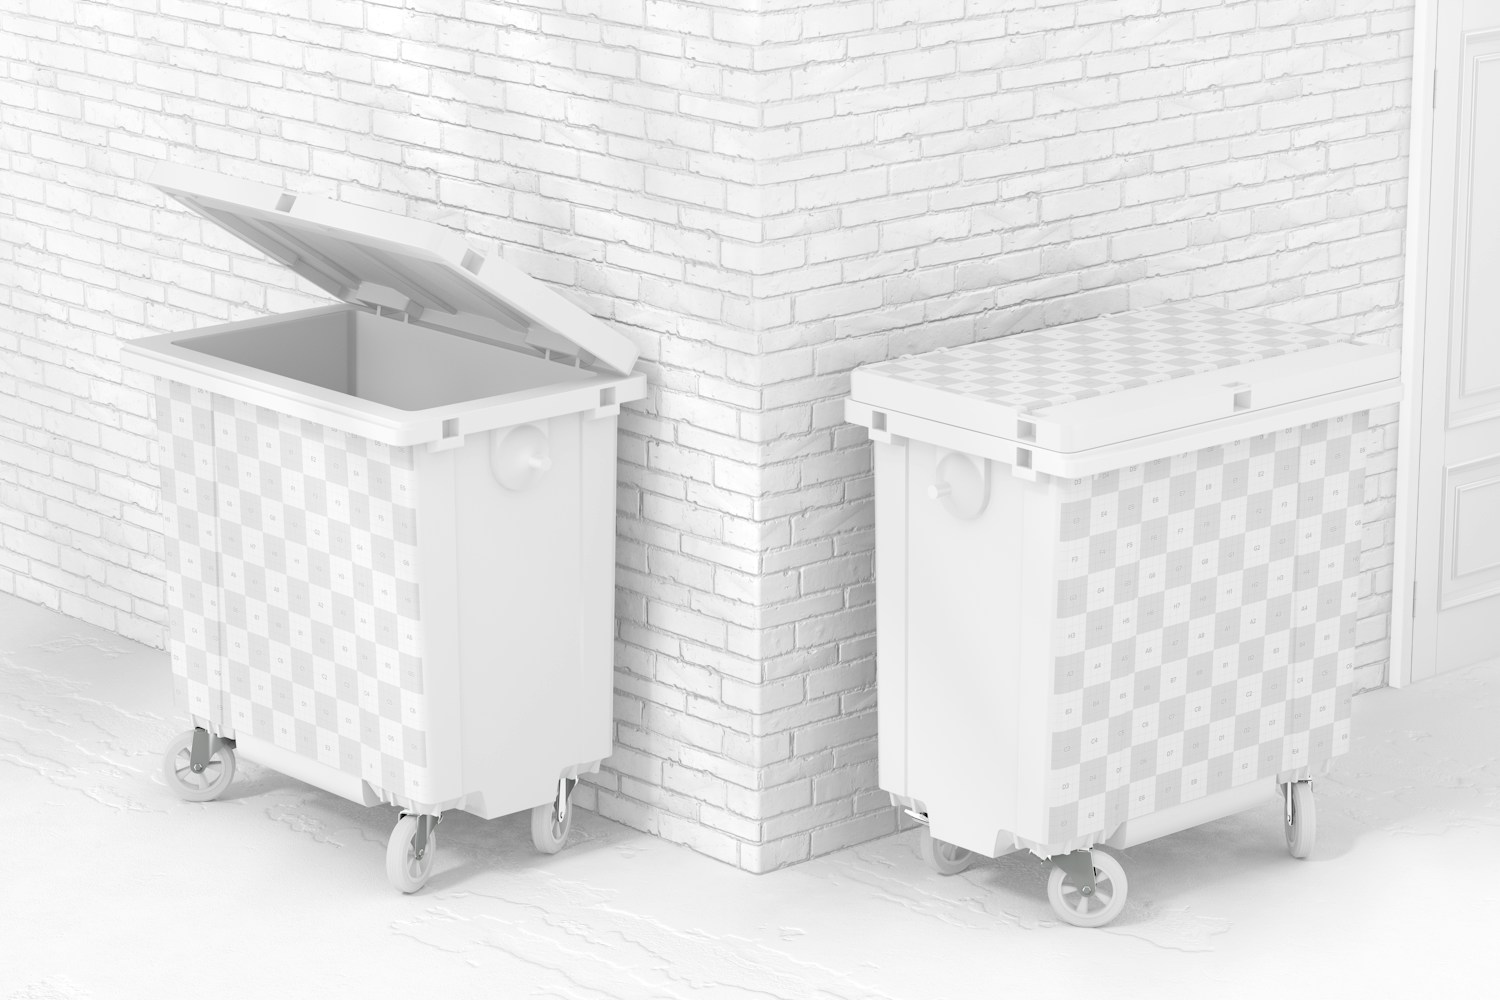 Trash Containers Mockup, Opened and Closed